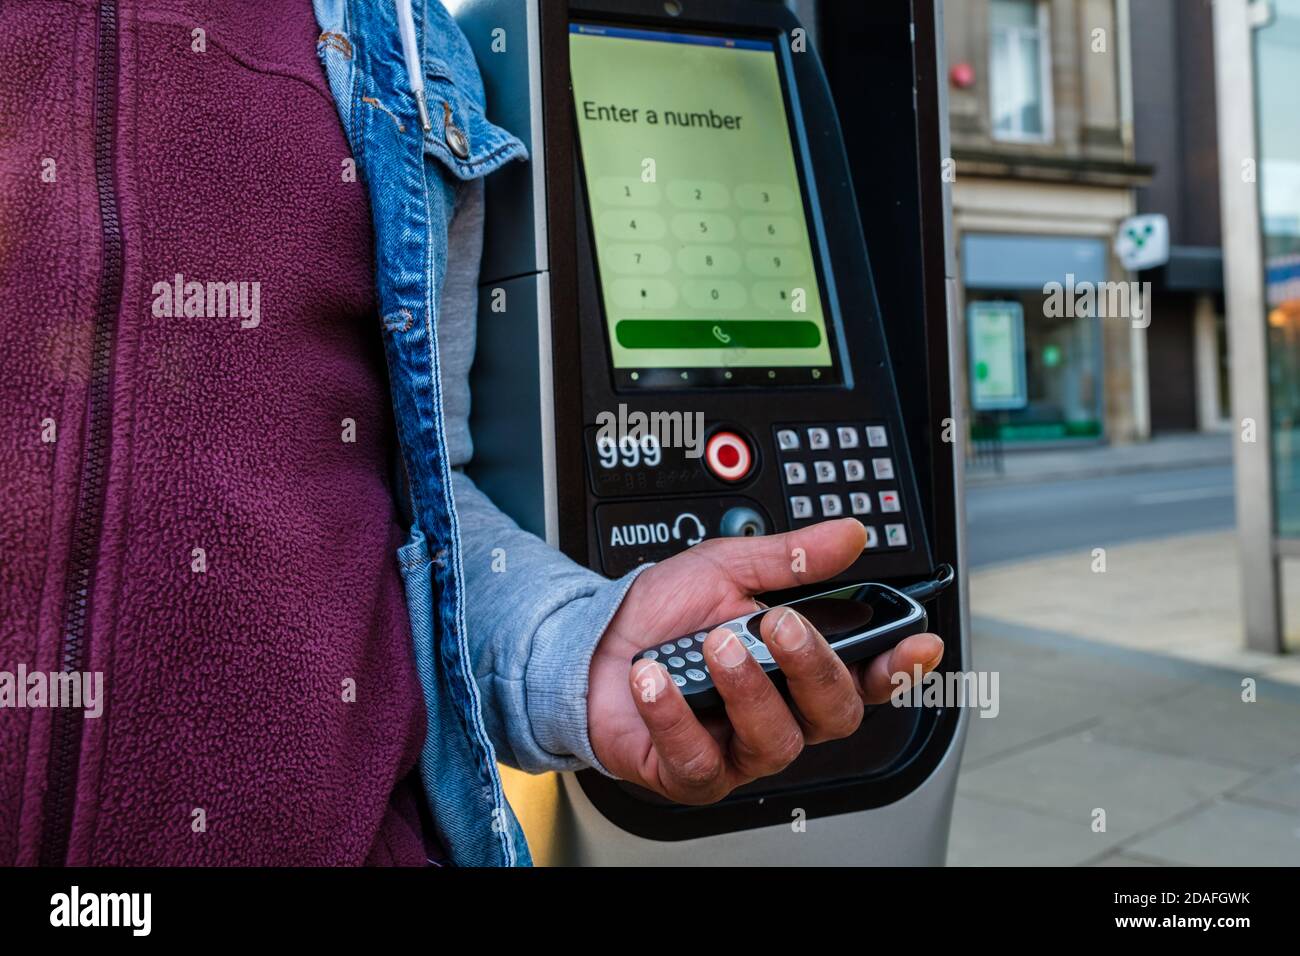 Charge Point for public mobile phones installed in Sheffield city centre Stock Photo